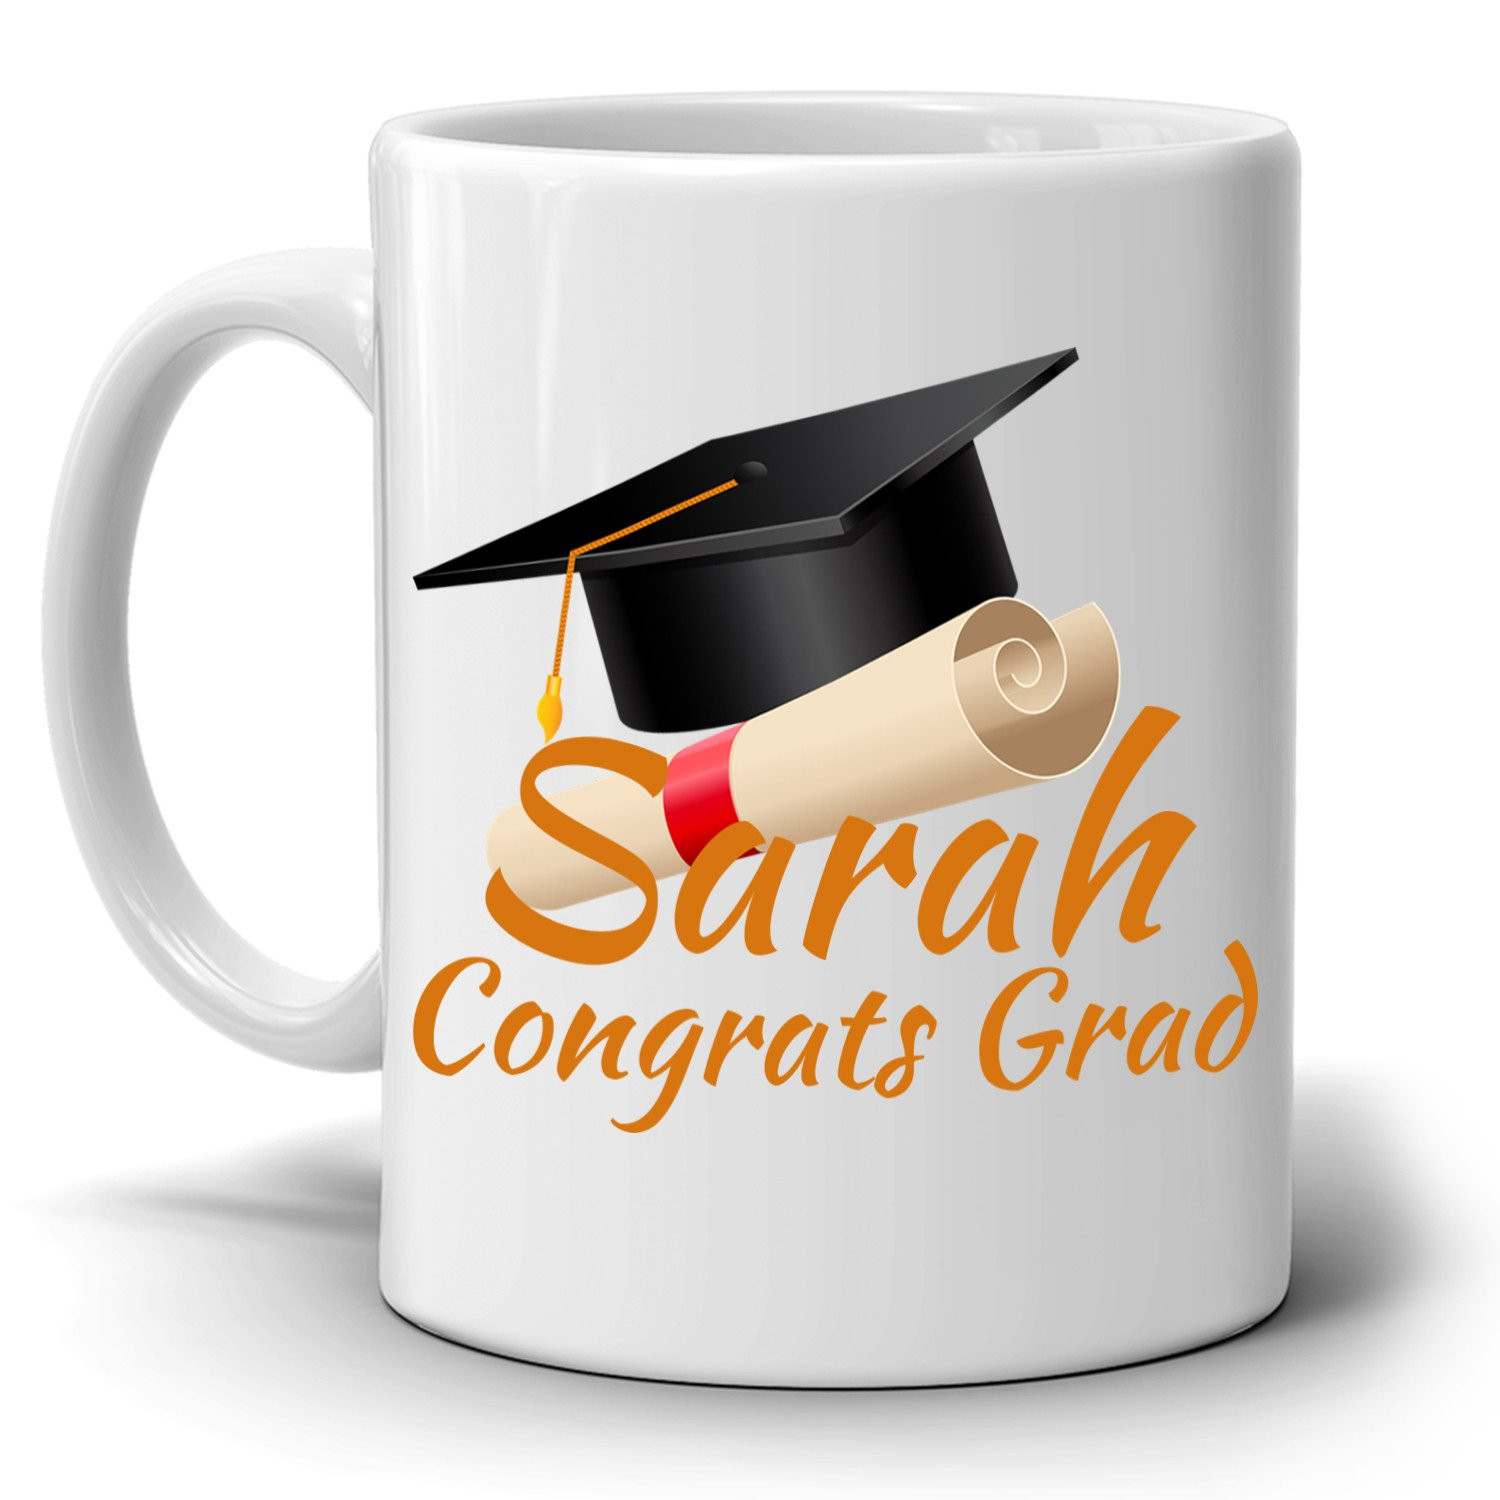 University Graduation Gift Ideas For Her
 Personalized Congrats Grad Gift Cap Coffee Mug College